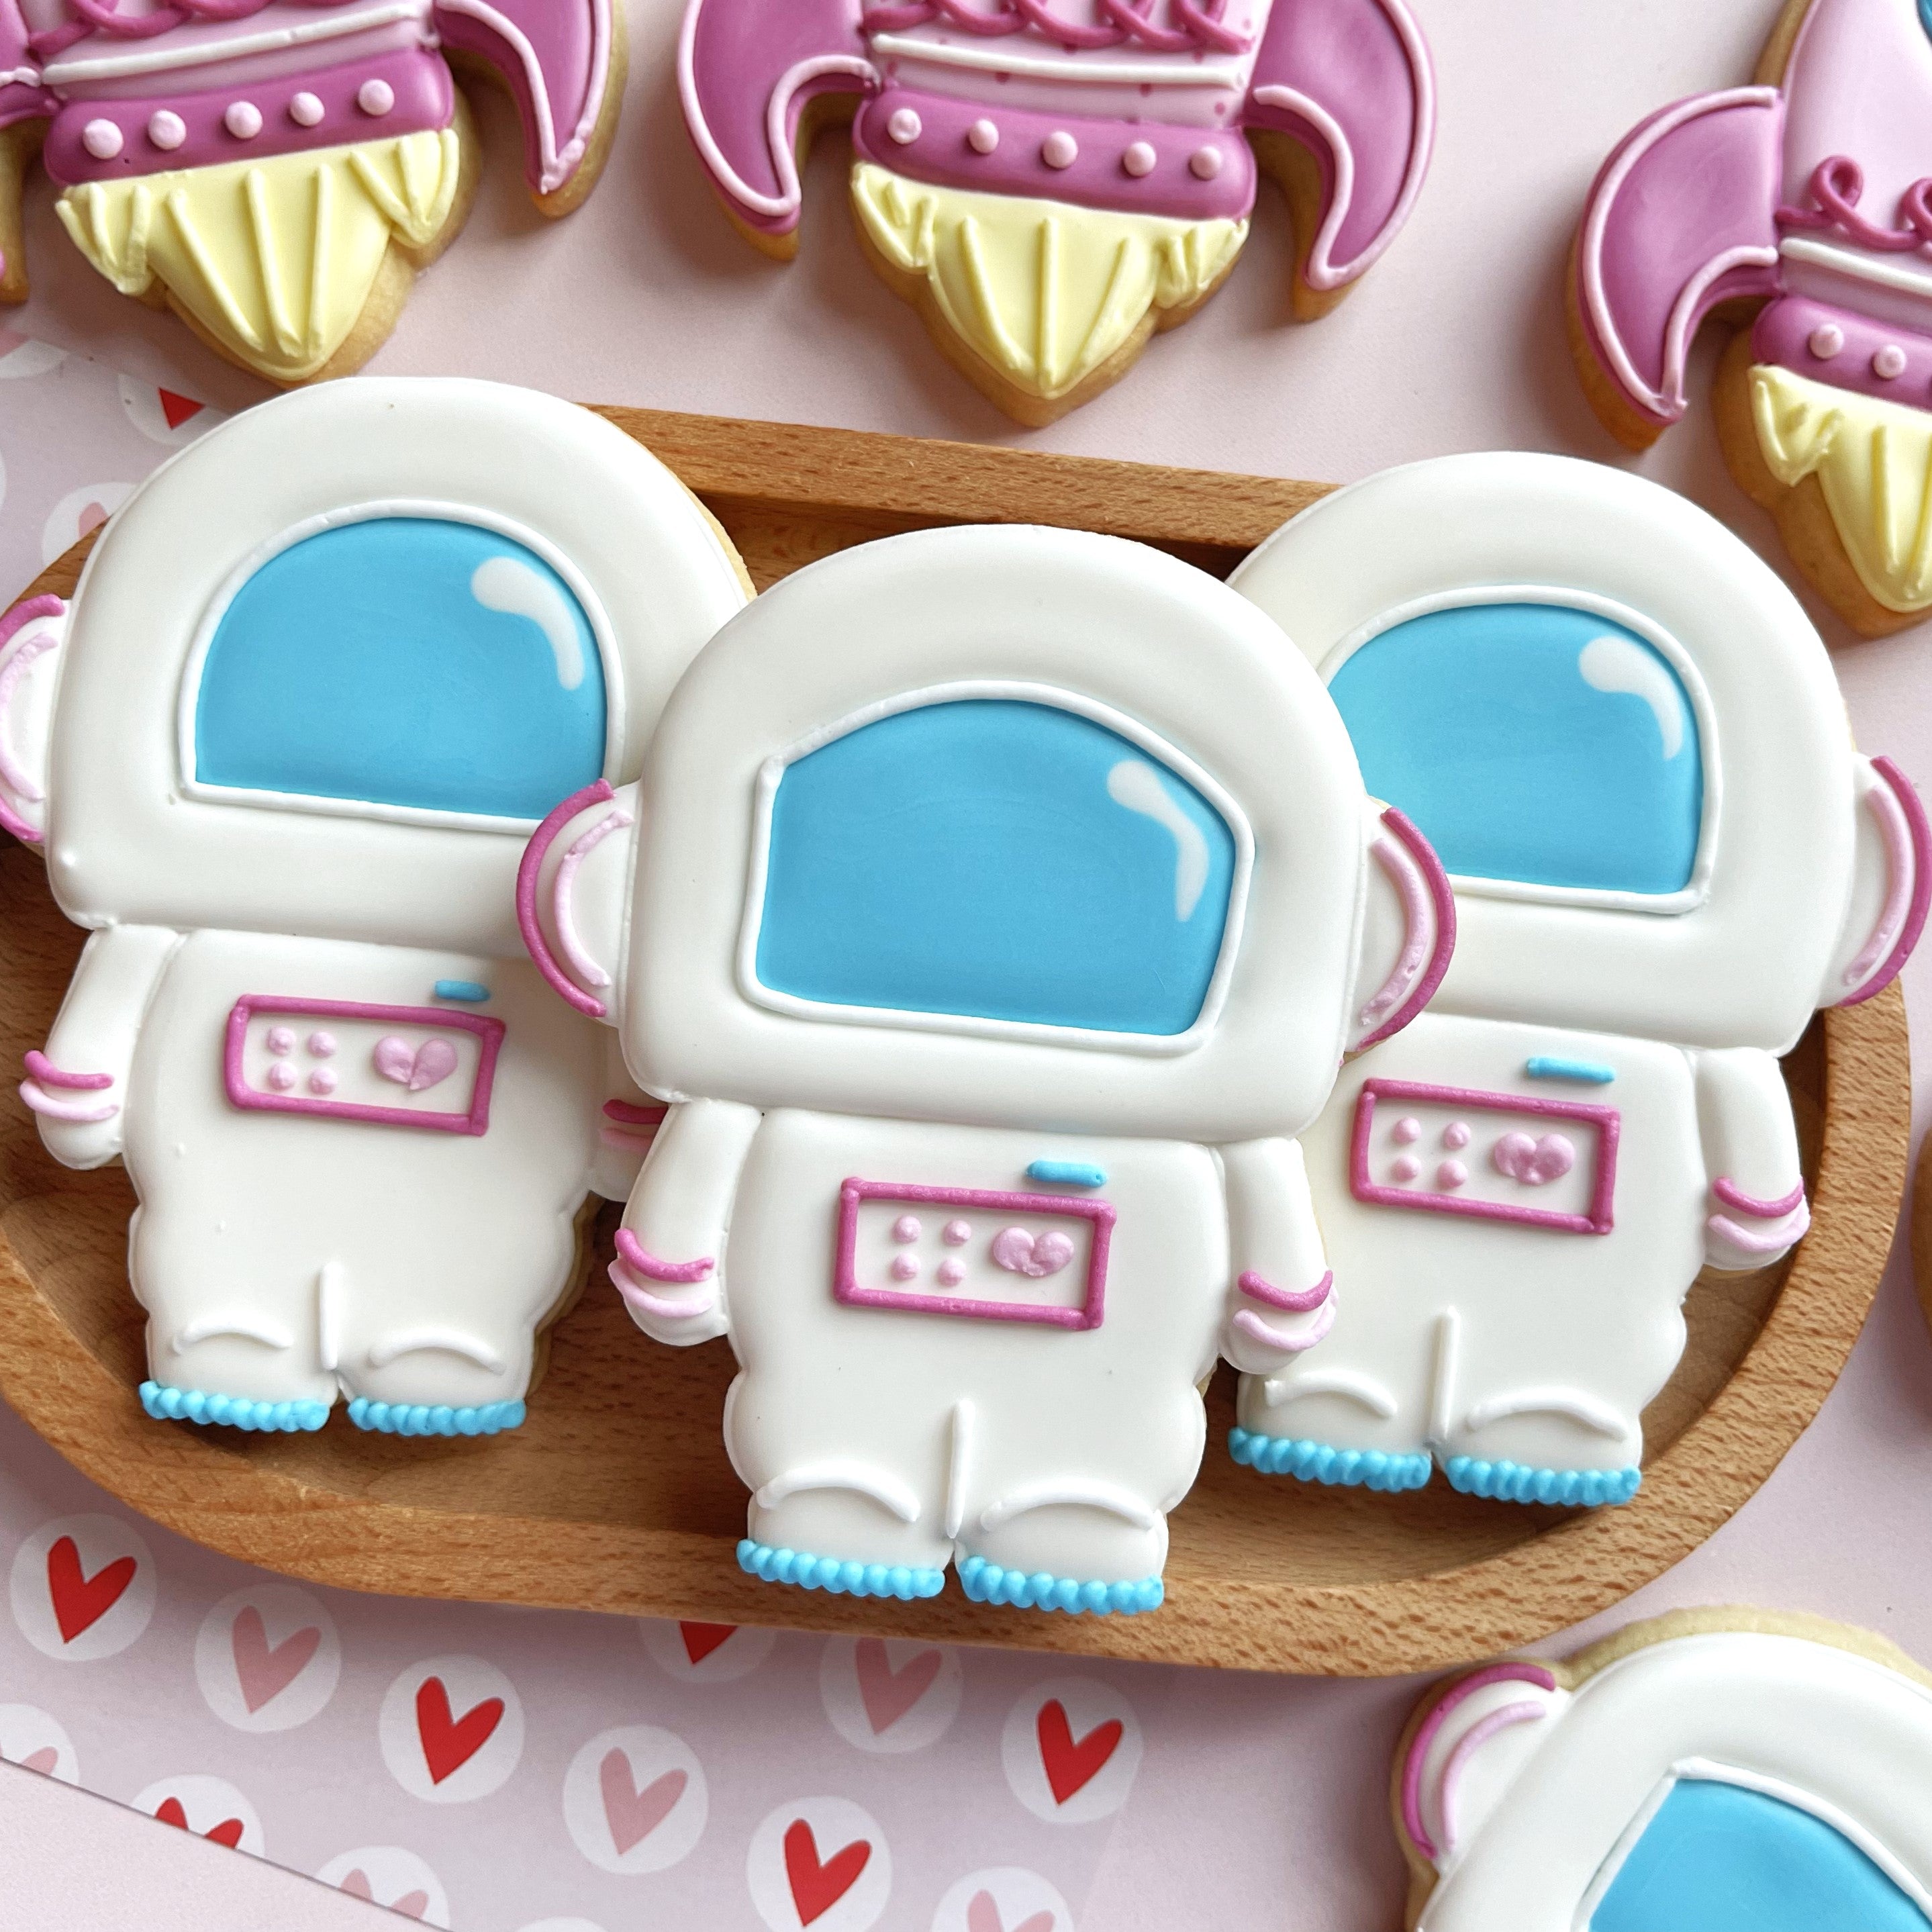 Astronaut Cookie Cutter, Space Cookie Cutter 